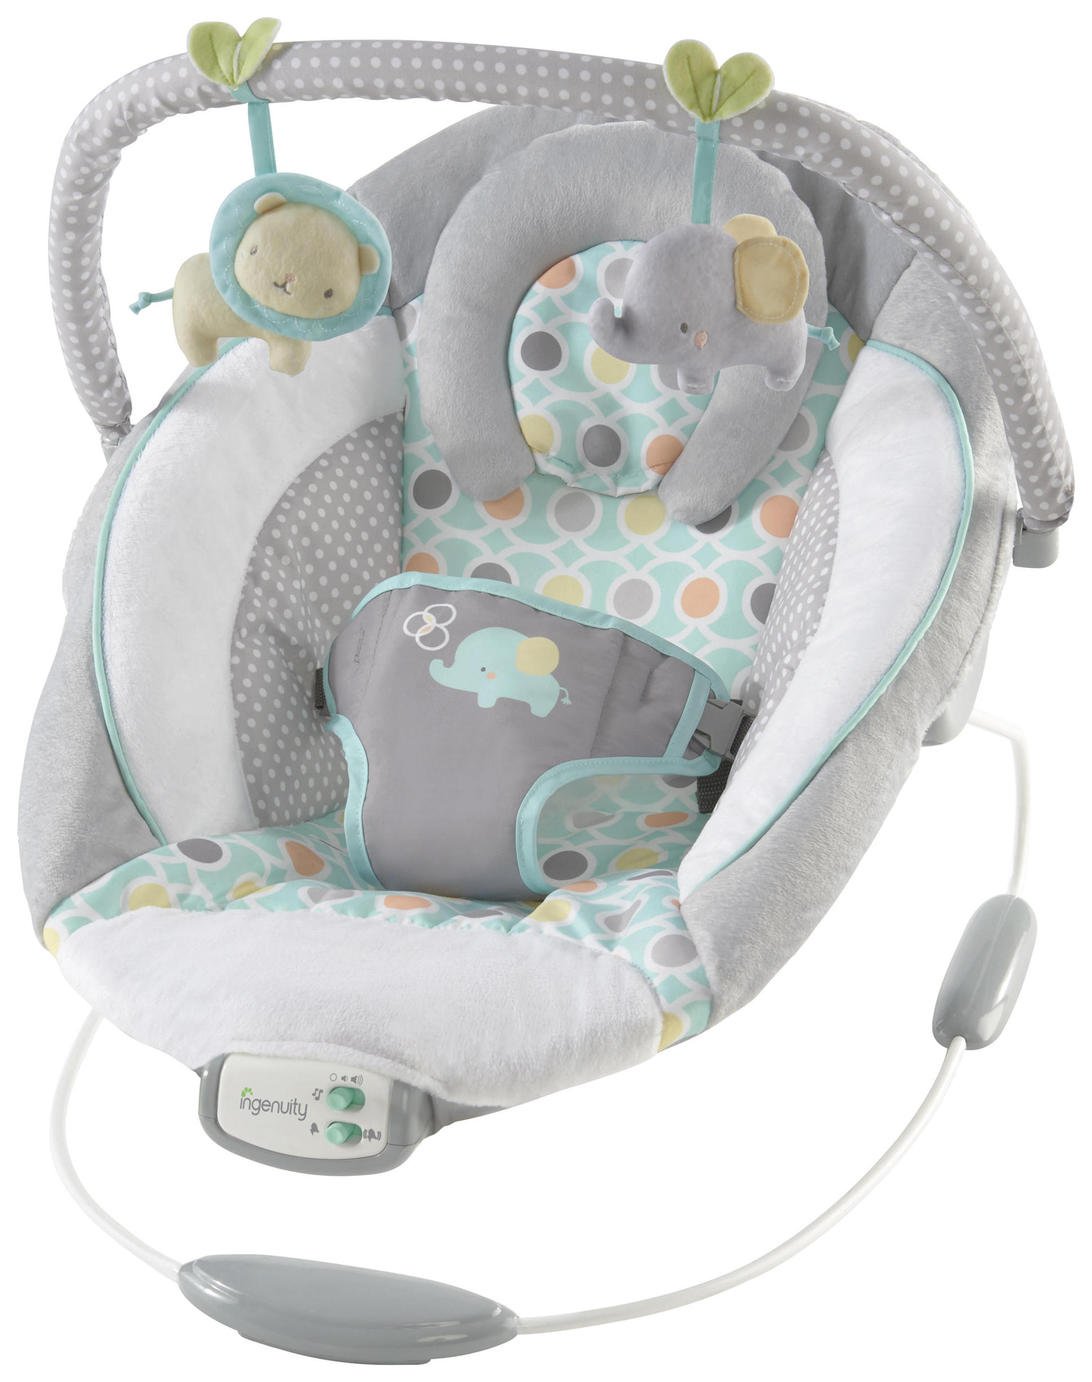 Ingenuity Morrison Soothing Bouncer review